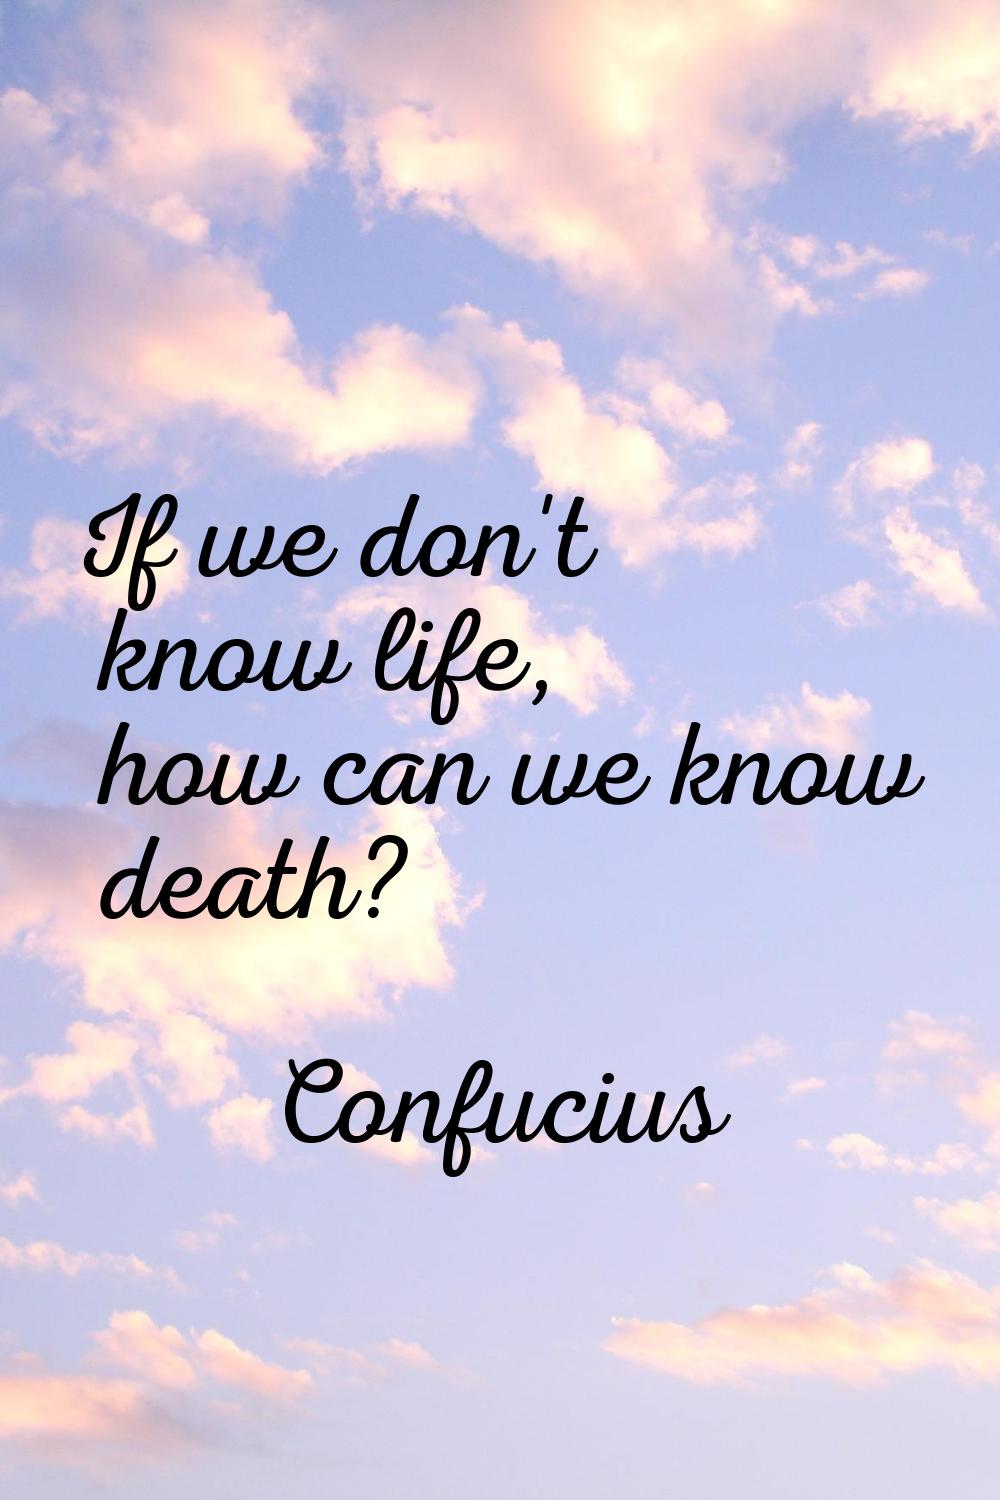 If we don't know life, how can we know death?